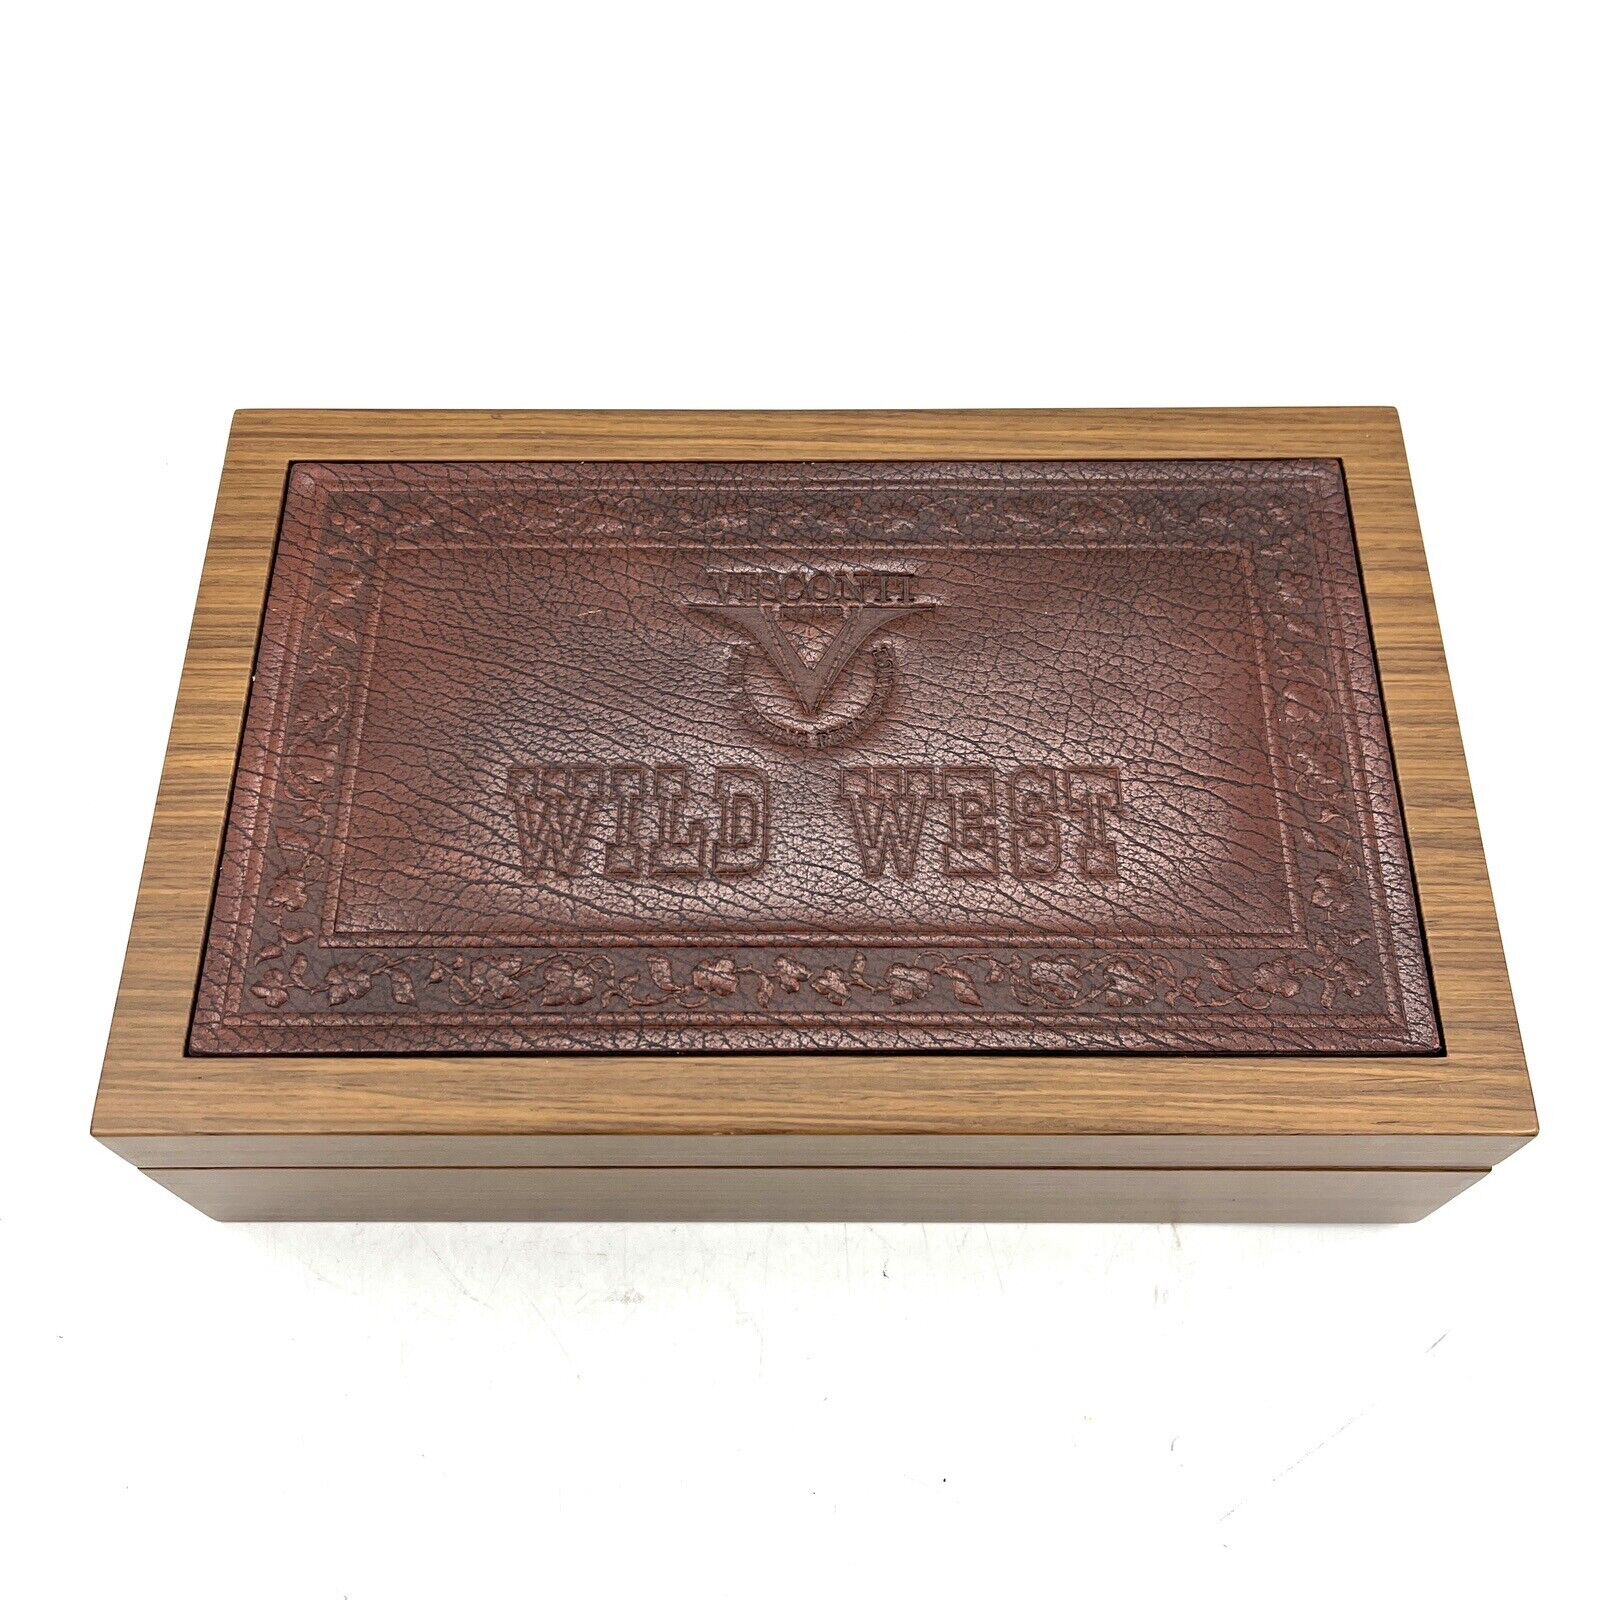 Visconti Wild West Collectors Edition Wooden and Leather Case - Case Only